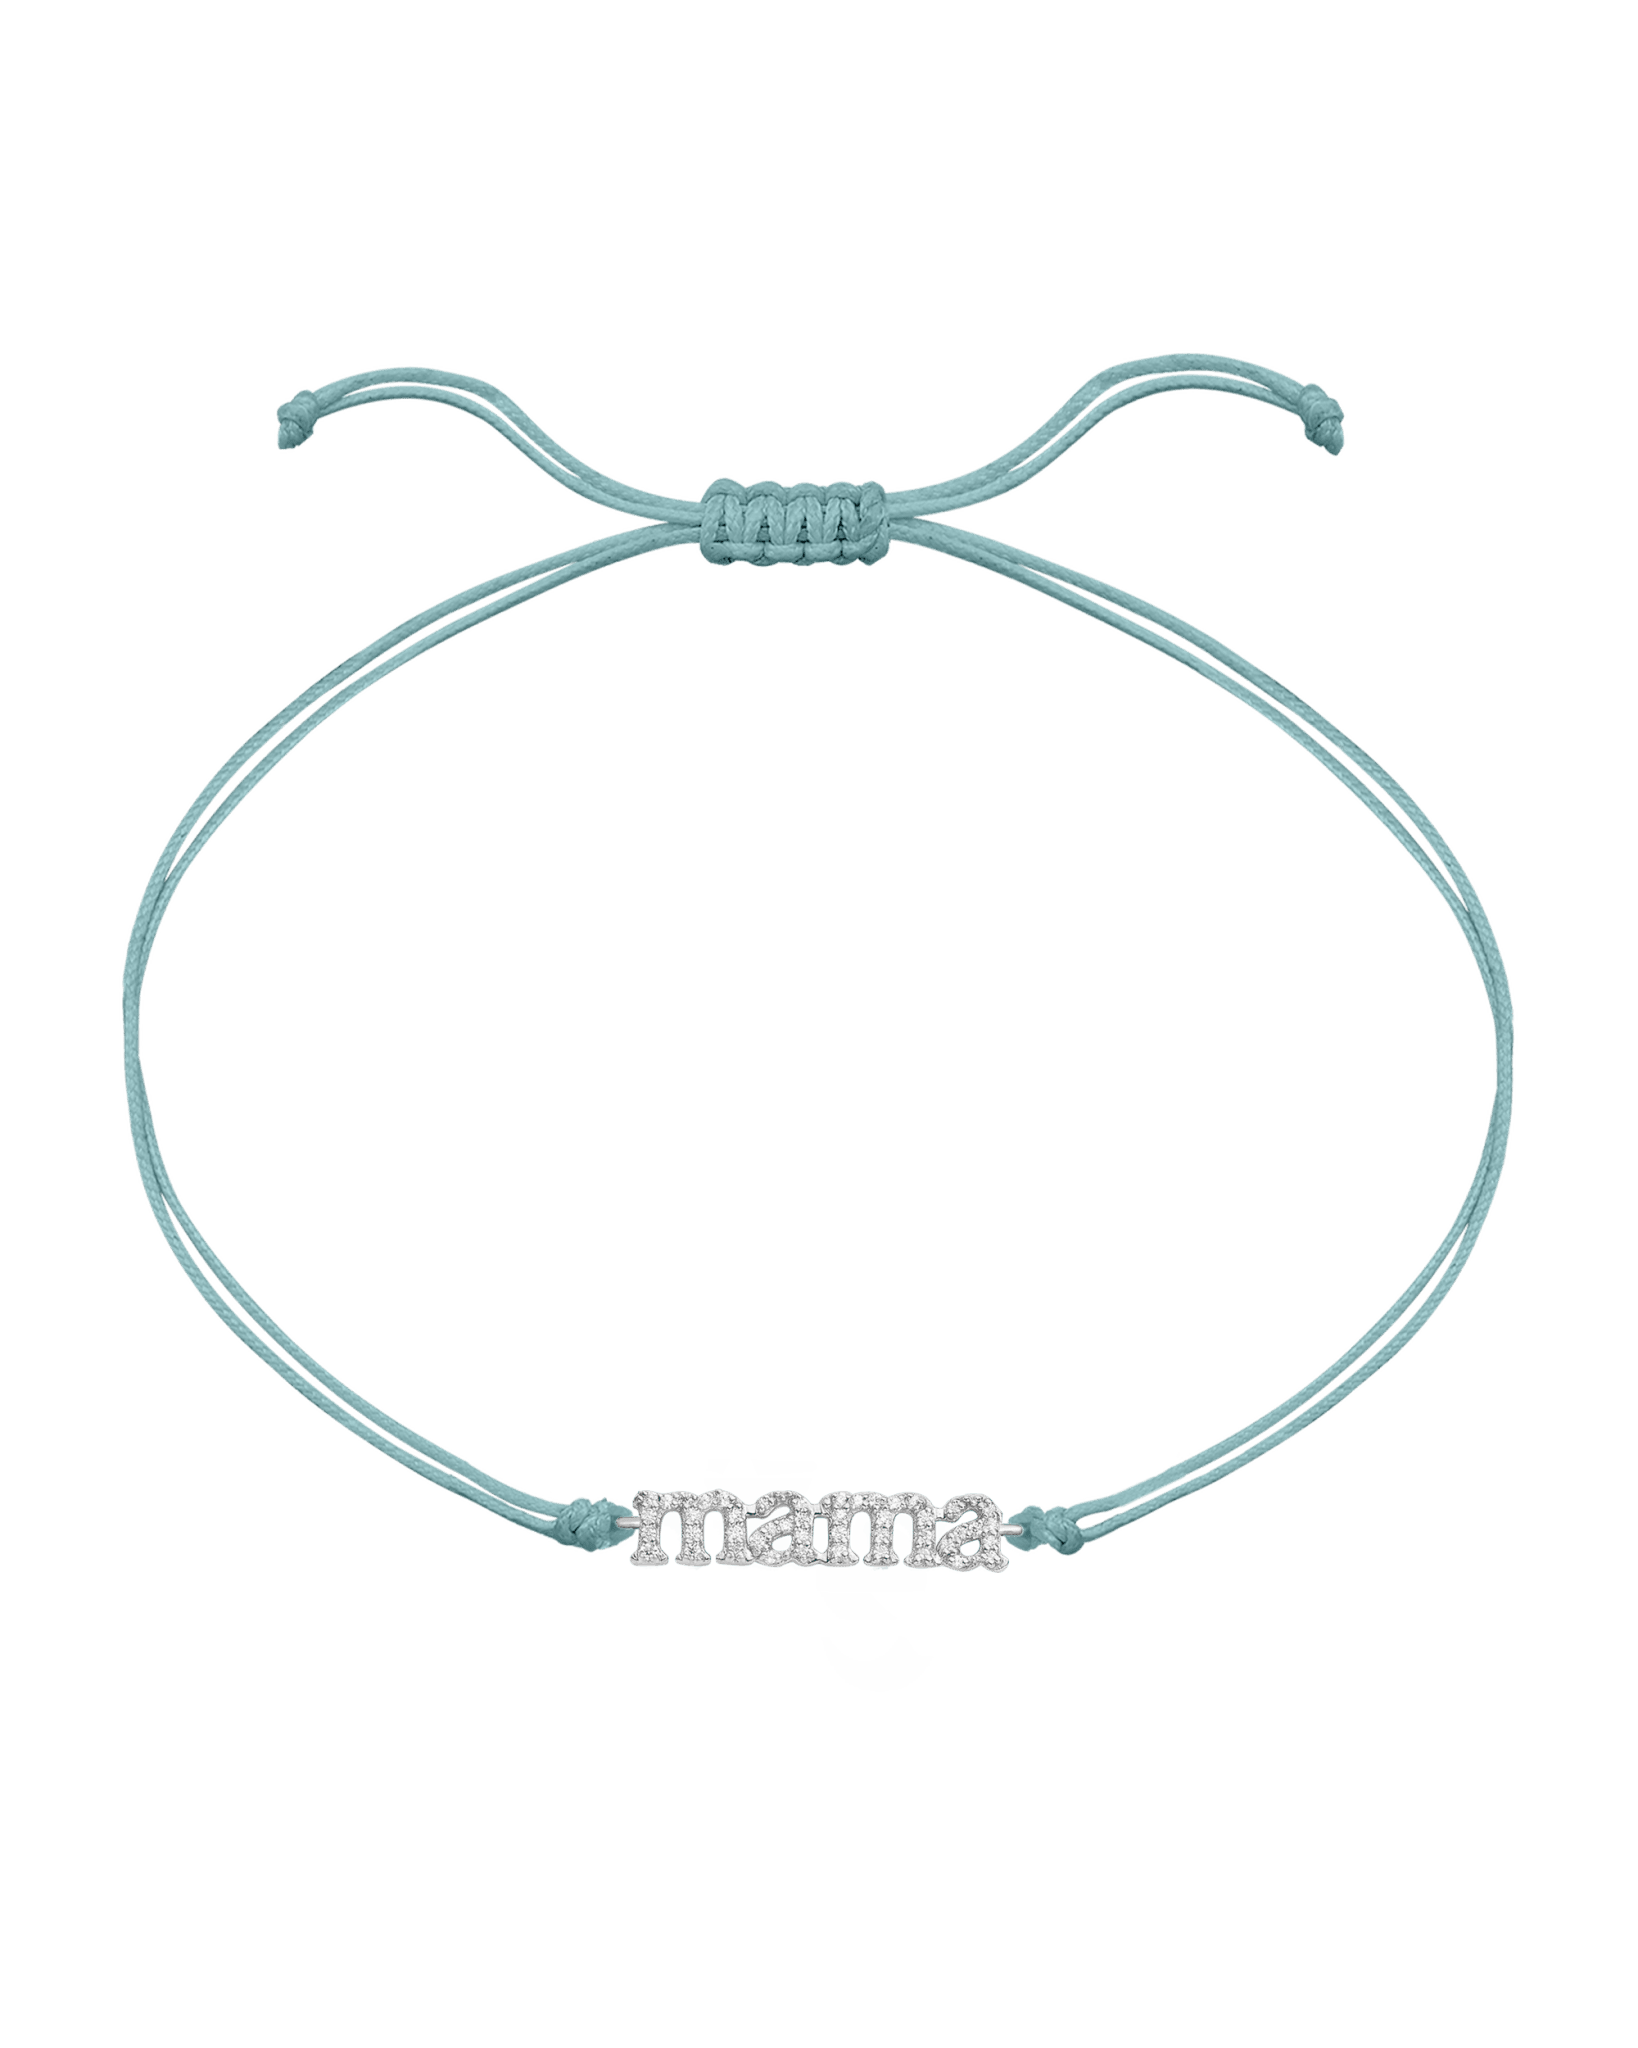 Mama String of Love - 14K White Gold Bracelets magal-dev Turquoise Paved (+$140) 